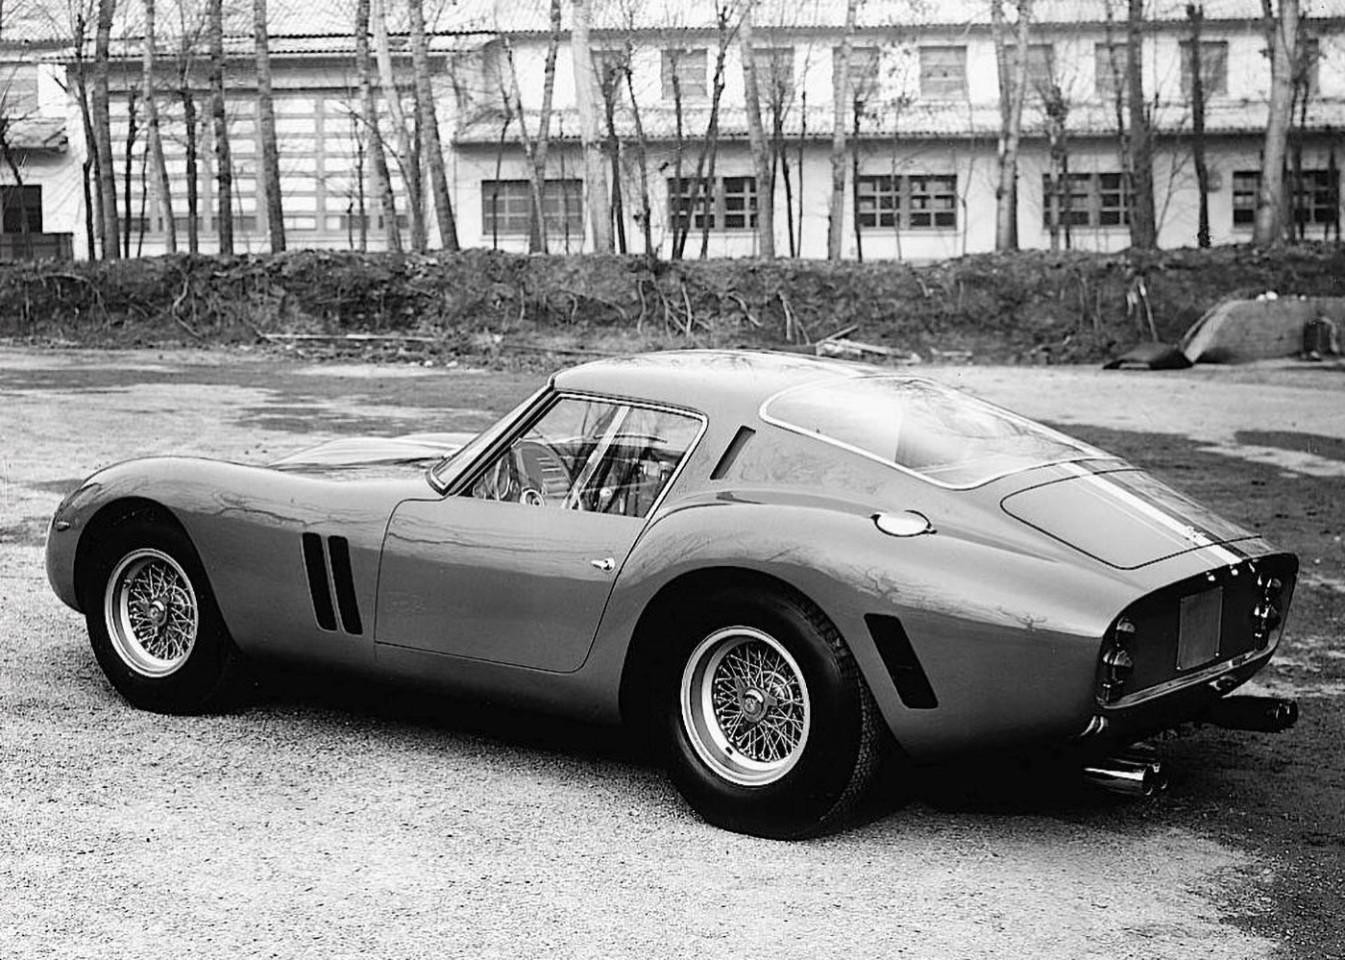 The first 250 GTO, the test car driven by Willy Mairesse in late 1961 and the car shown at the press conference on February 24, 1962: Ferrari 250 GTO #3223GT, take a bow.